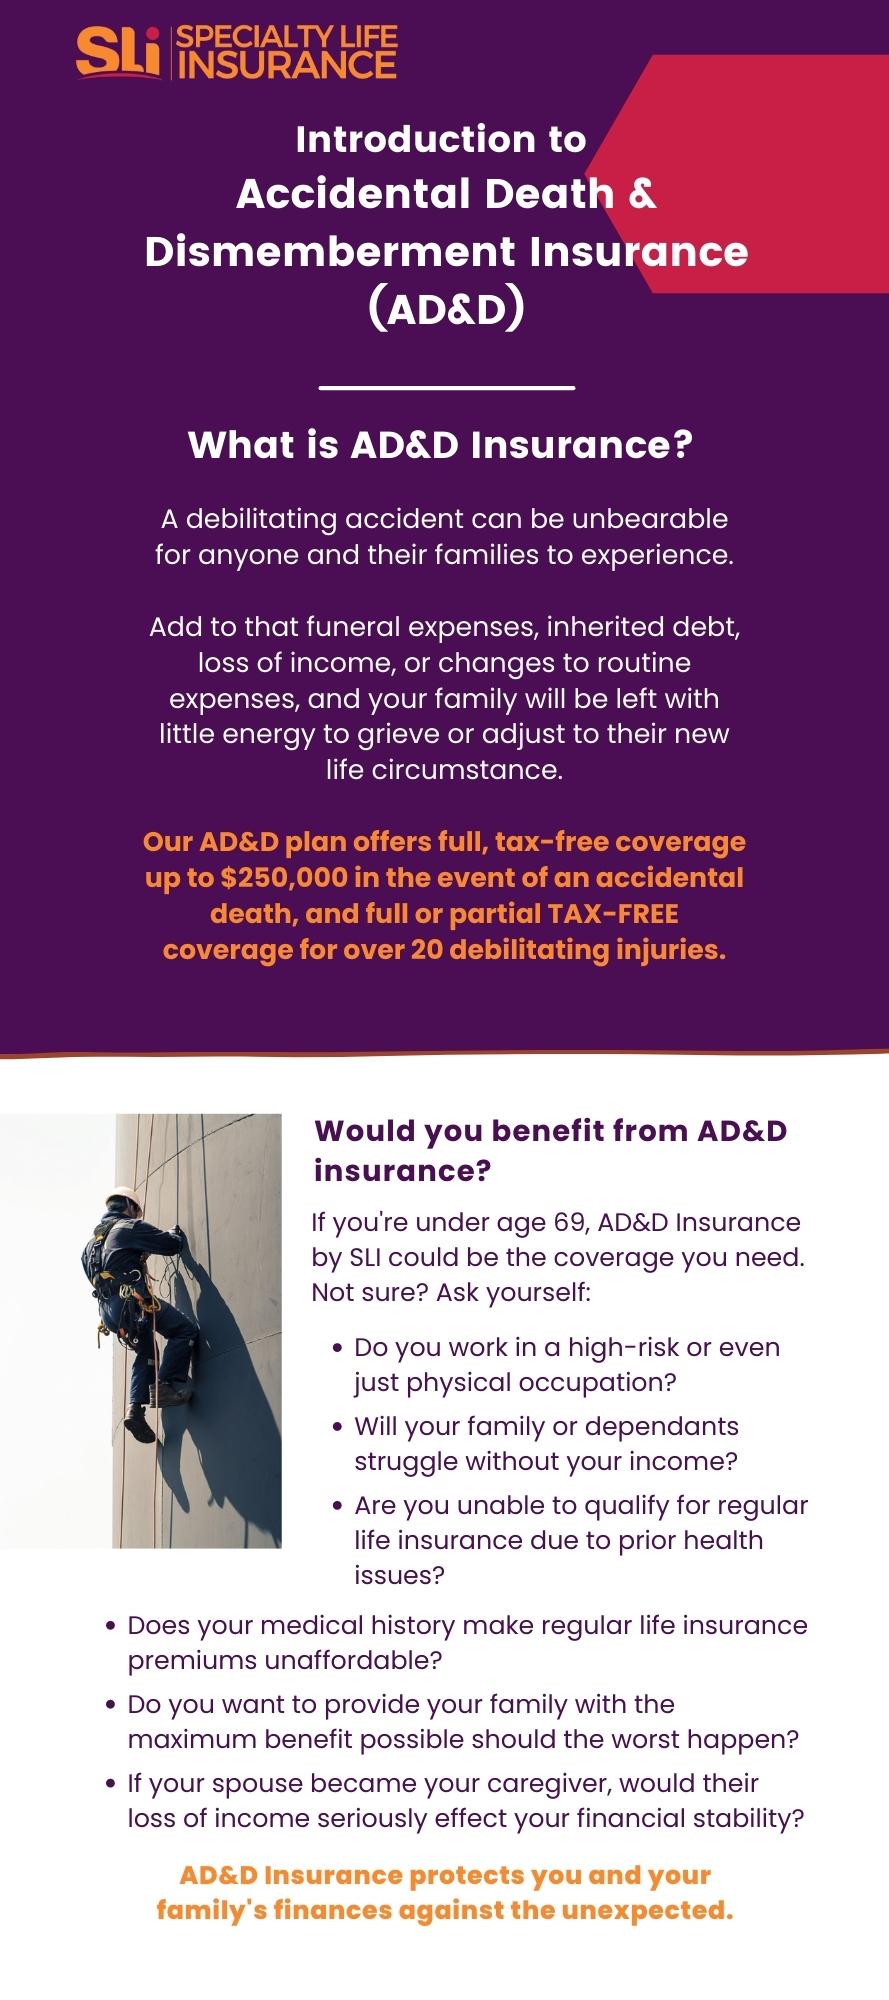 What is accidental death and dismemberment insurance? (infographic)